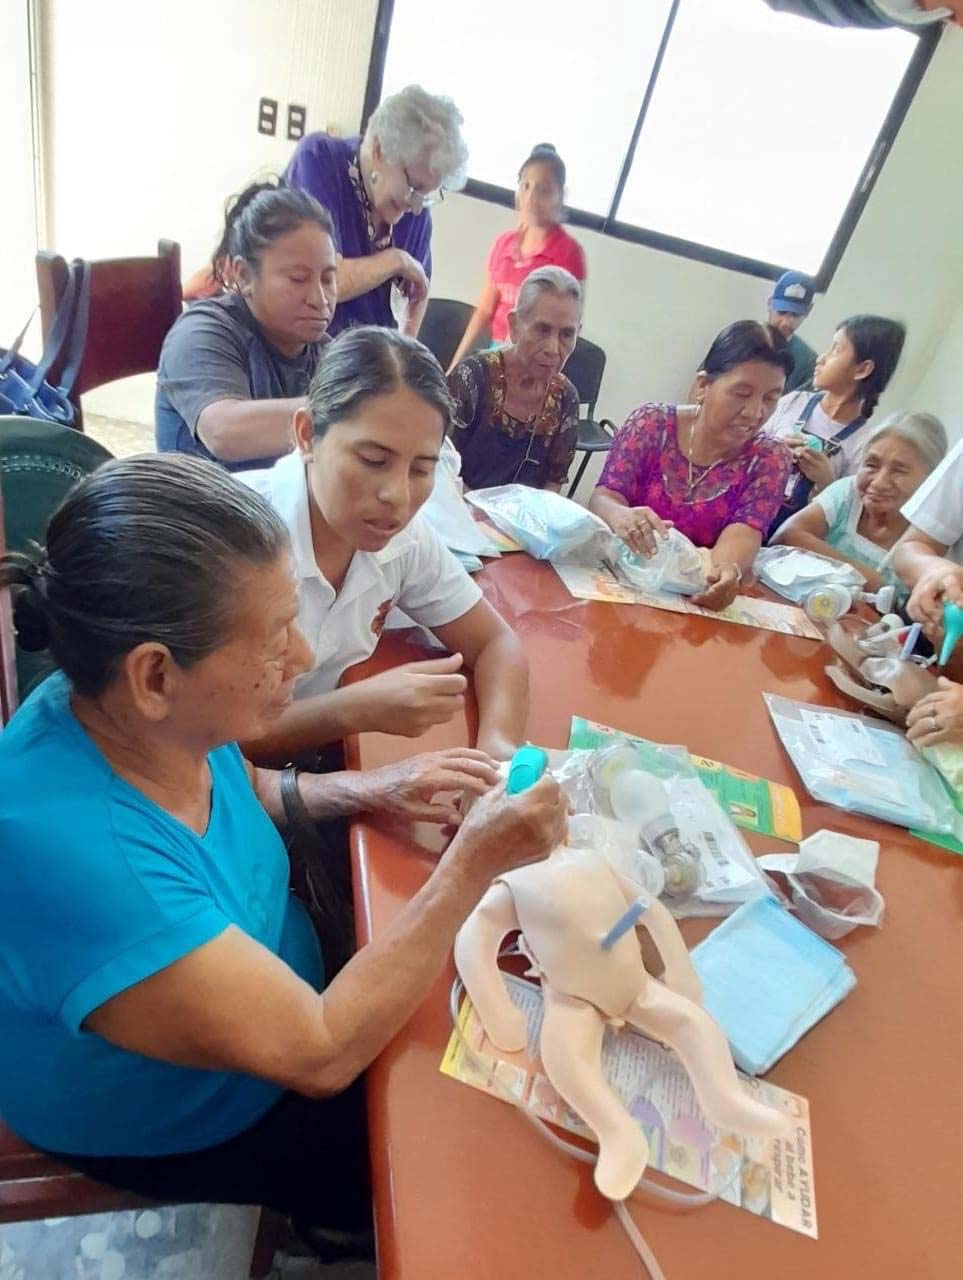 Midwives practicing the use of the ambu bag on a model newborn